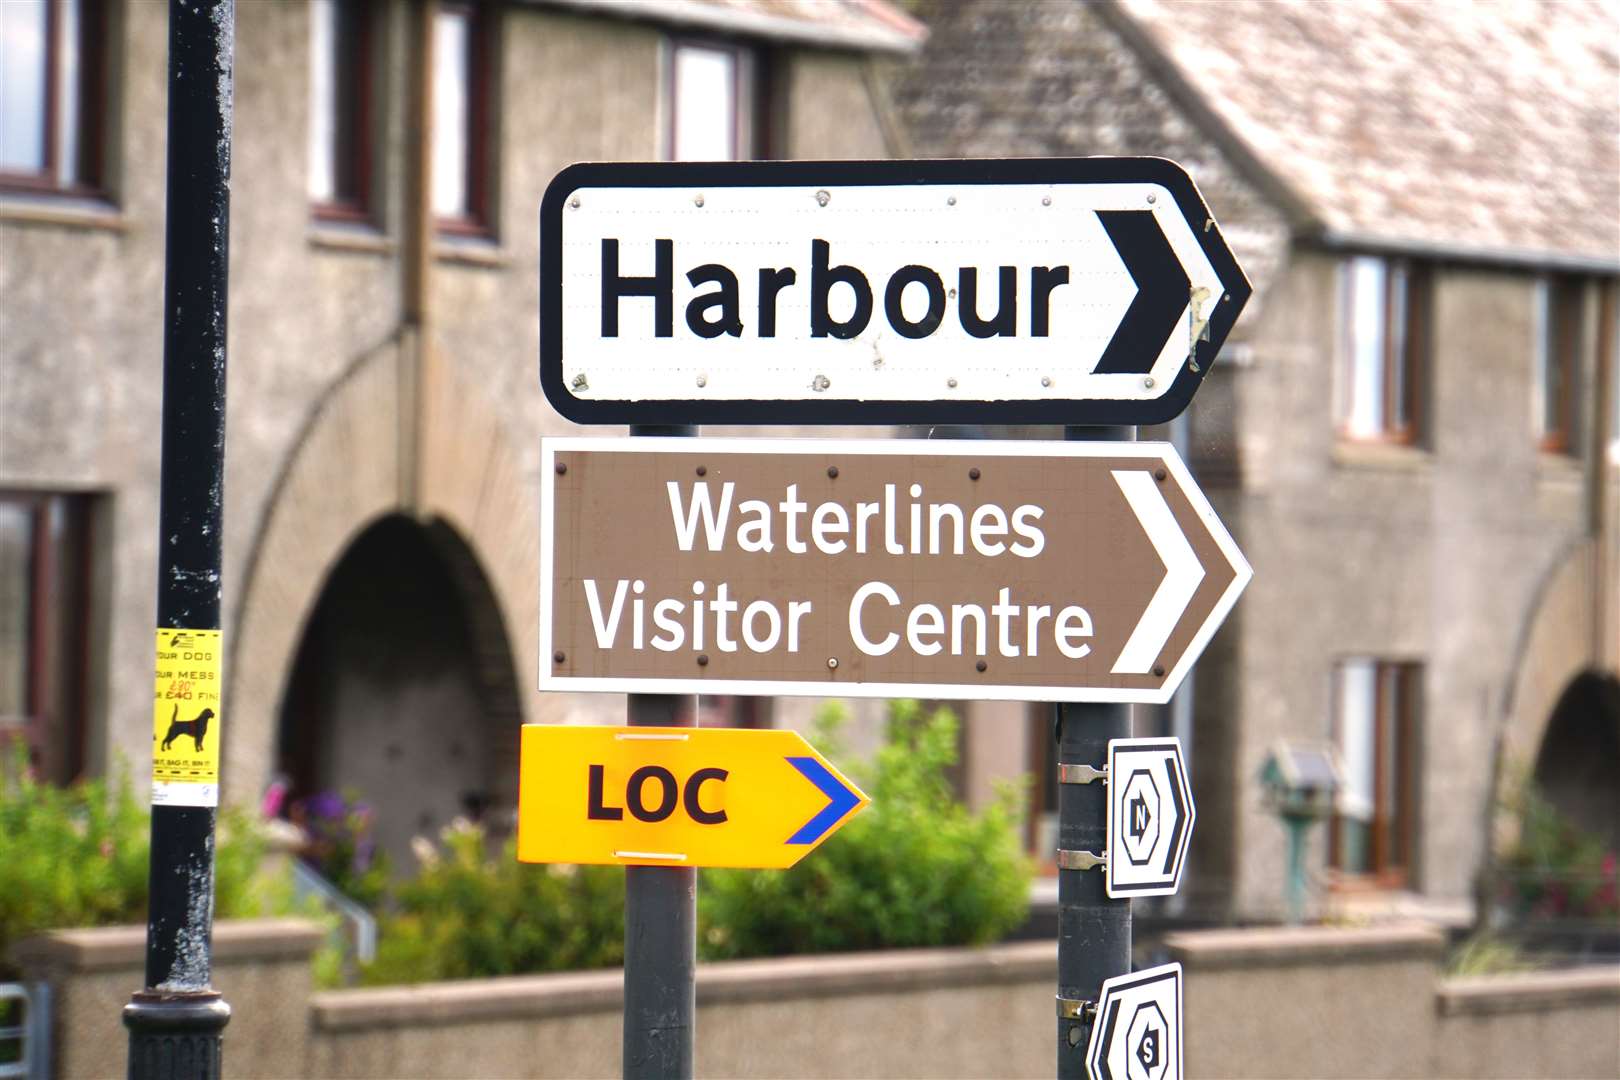 The 'LOC' sign points towards Lybster harbour so crew members can find the location.